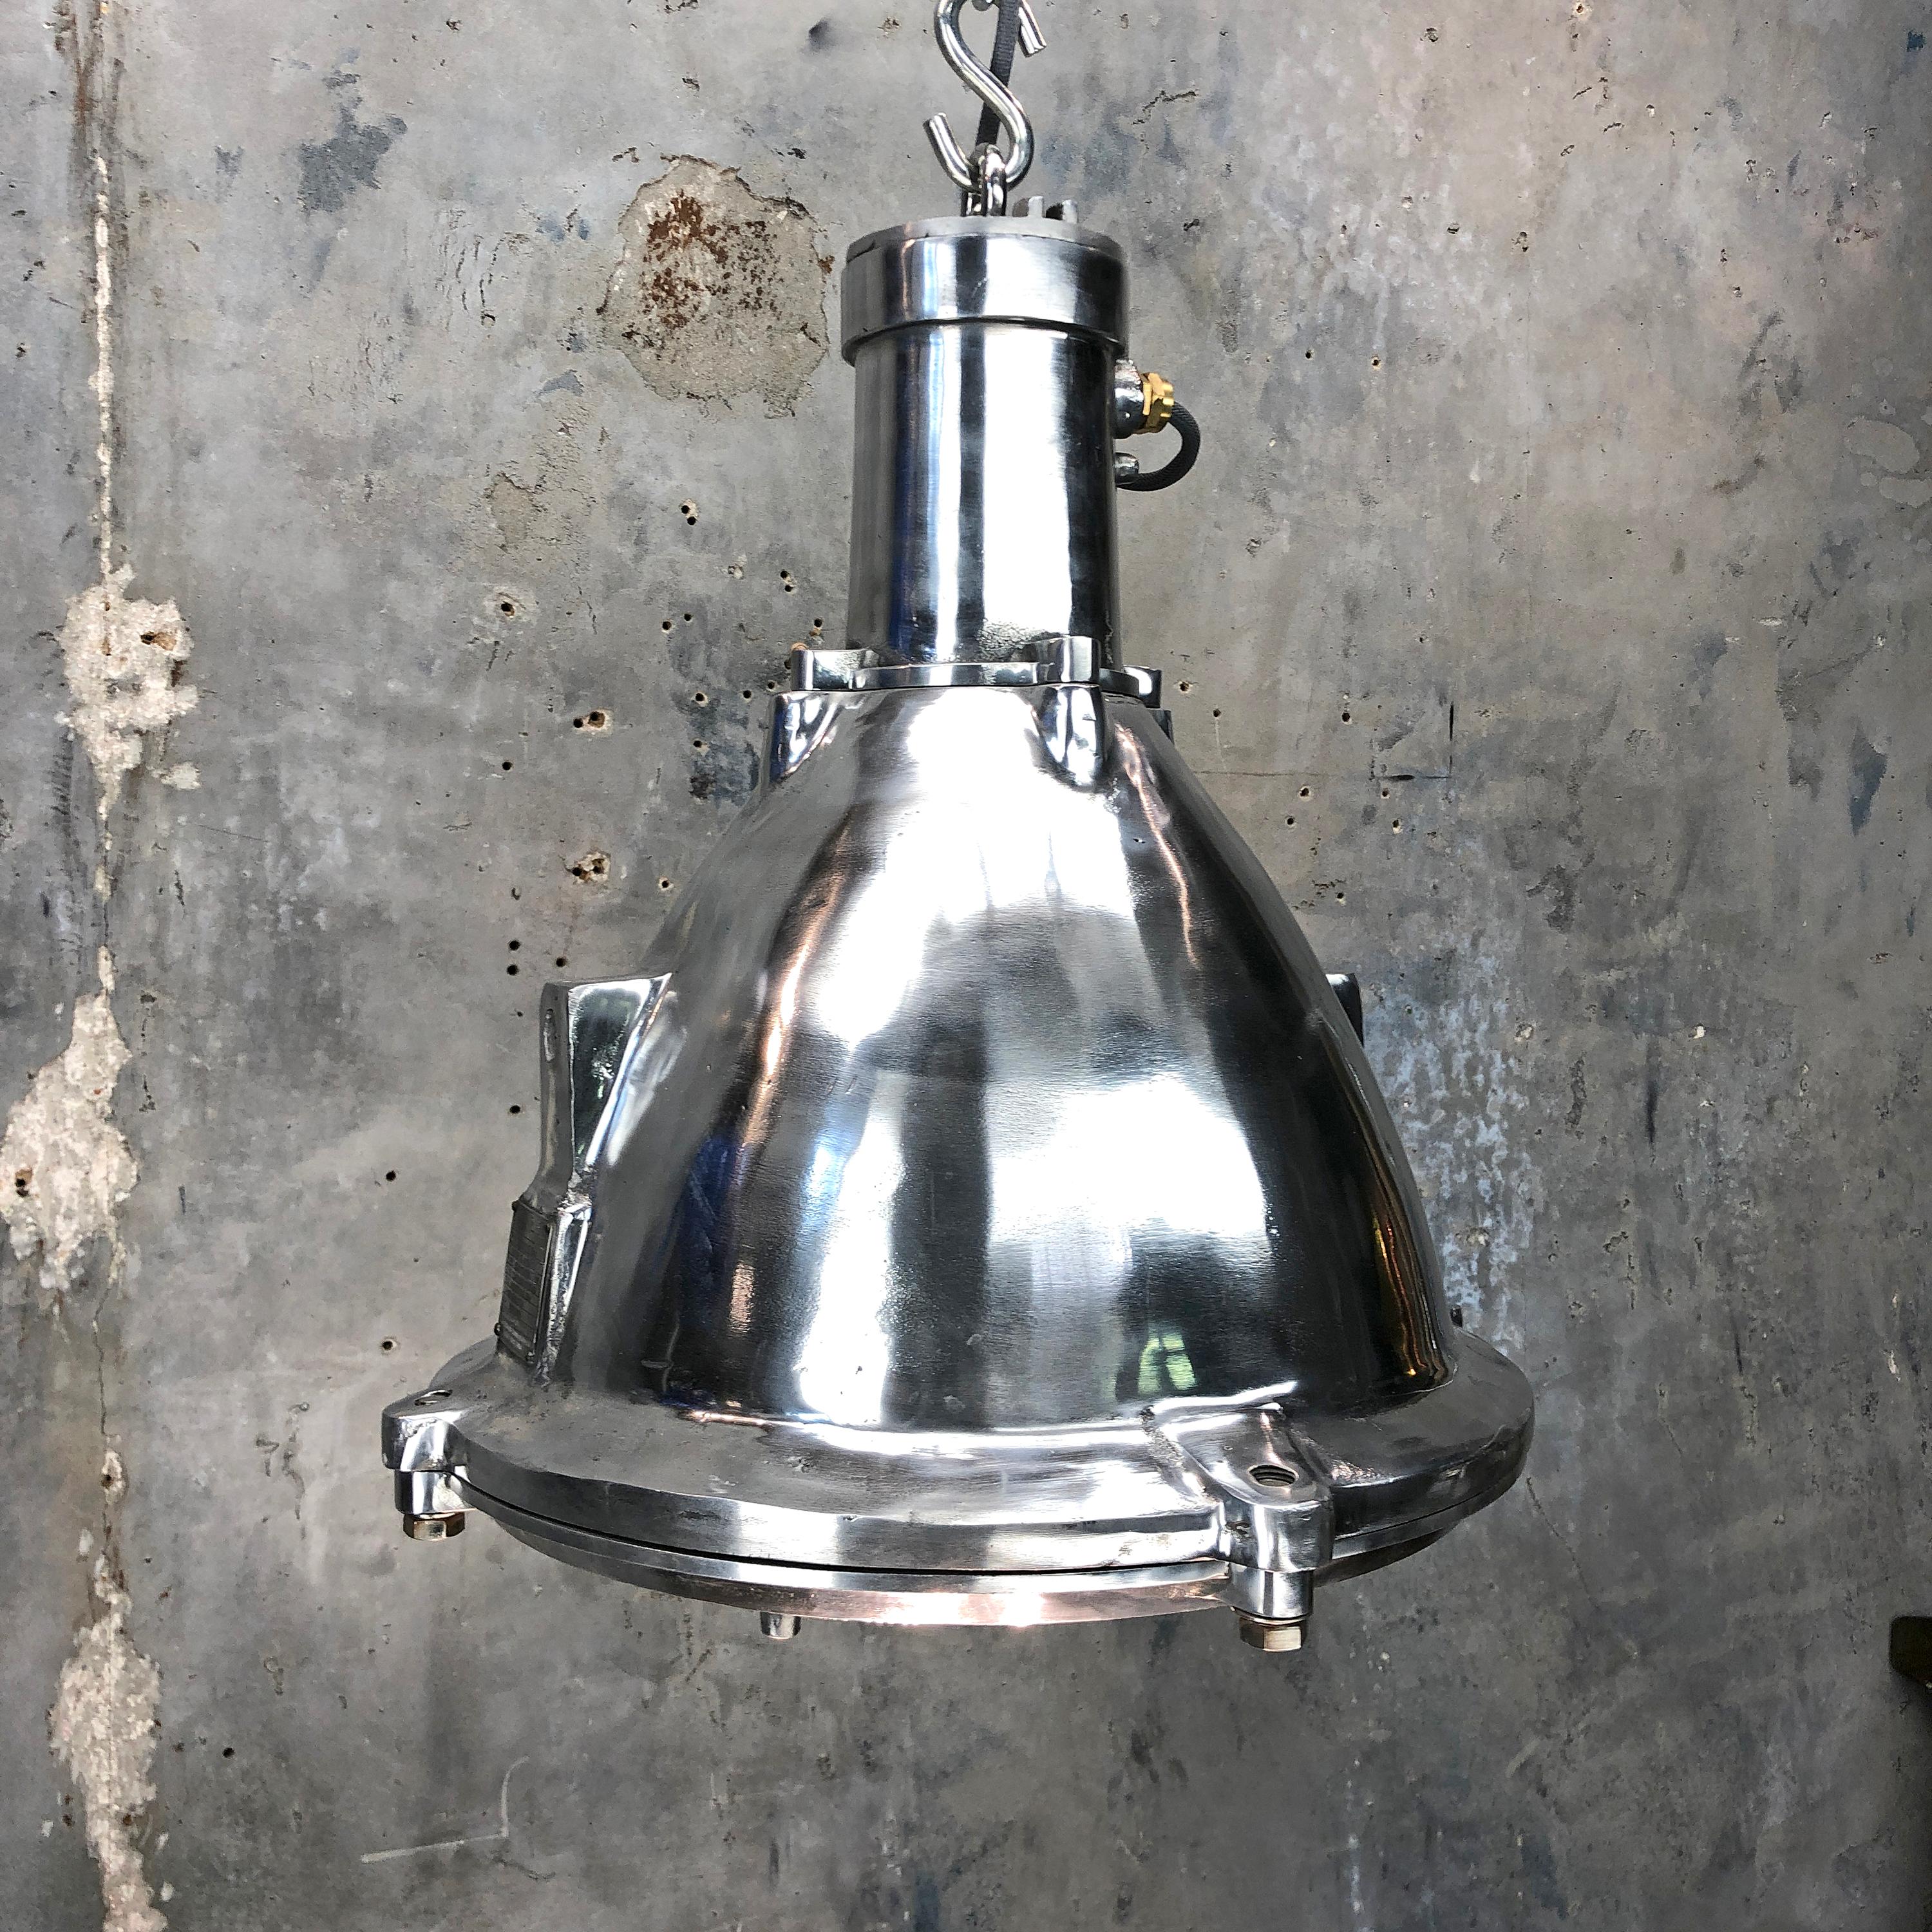 This is an original marine cargo pendant light made by Baliga of India.

Made from cast aluminum which has been stripped and polished this lights boasts great build quality and an IP65 rating which allows the fixture to be used in wet